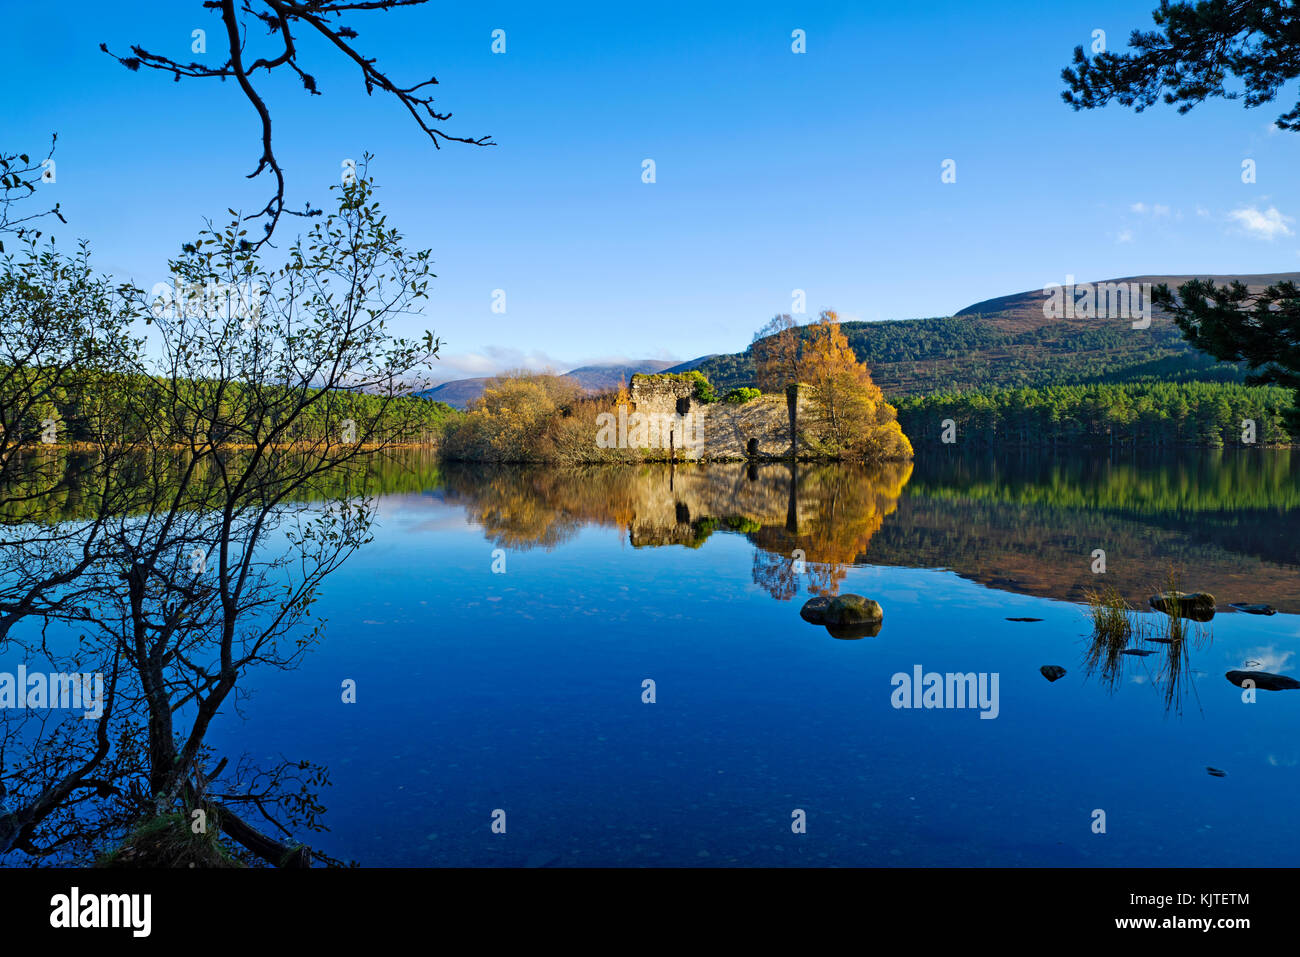 Loch an Eilein, Rothiemurchus, Cairngorms, Scottish Highlands, UK. The old ruined island castle reflected in the loch on a beautiful calm autumn day. Stock Photo